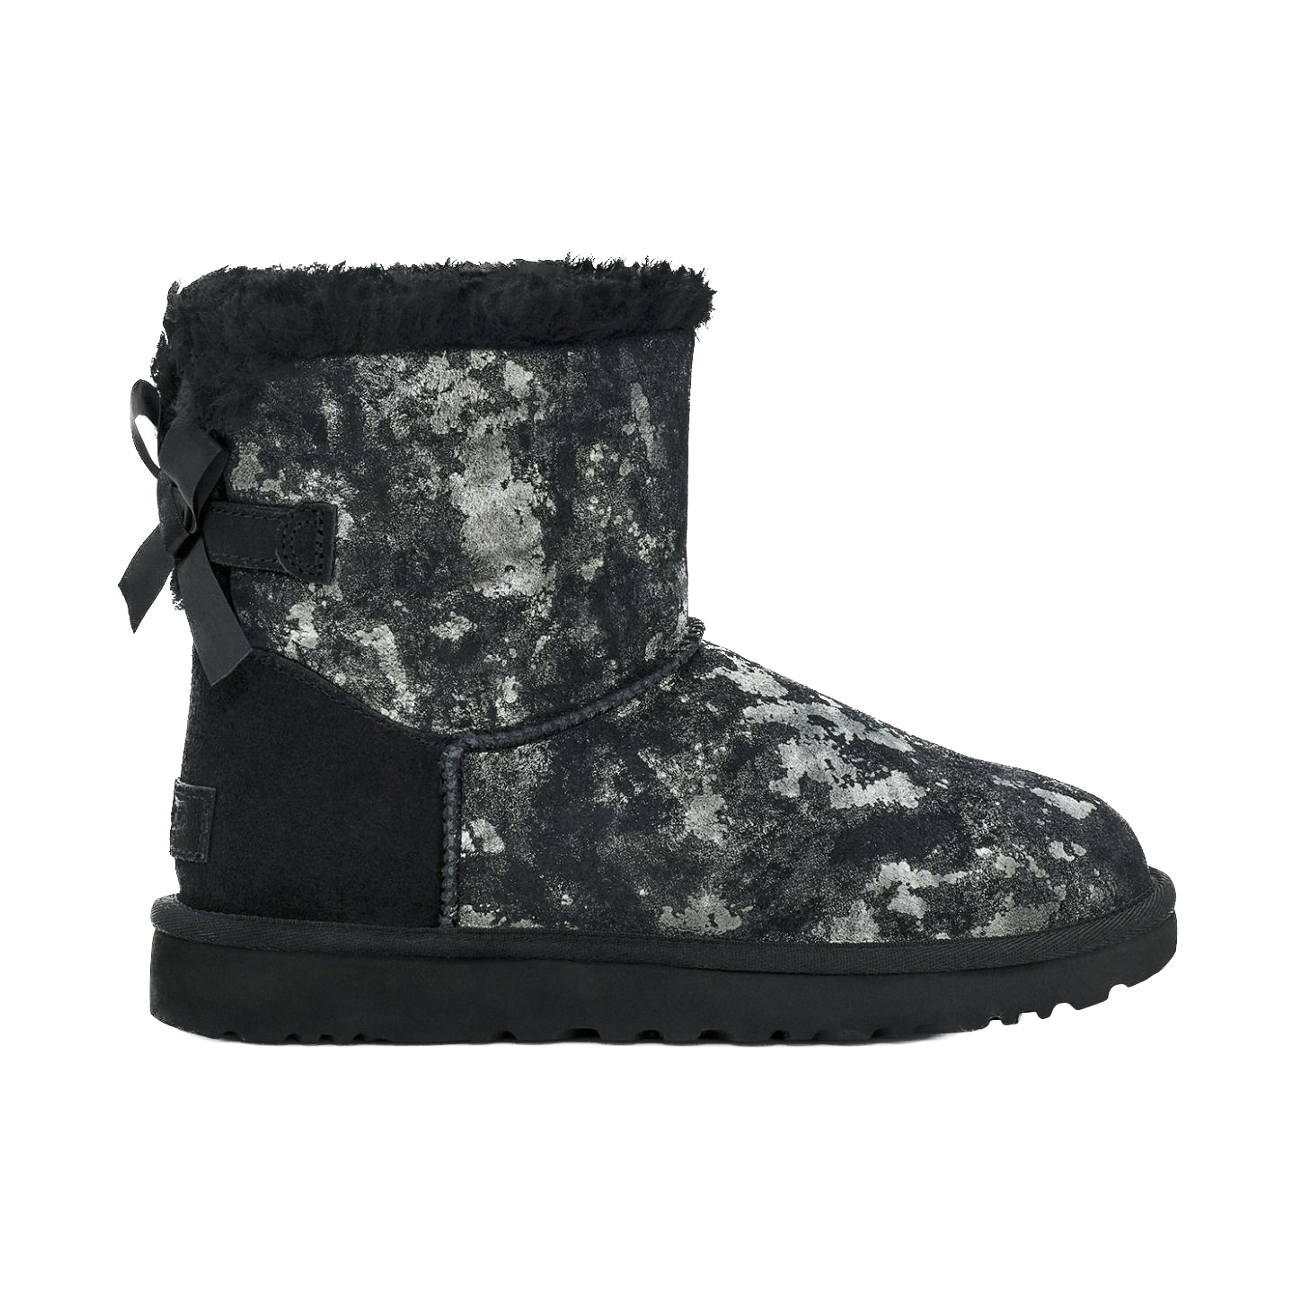 Best Deals for Ugg Bailey Bow Boots